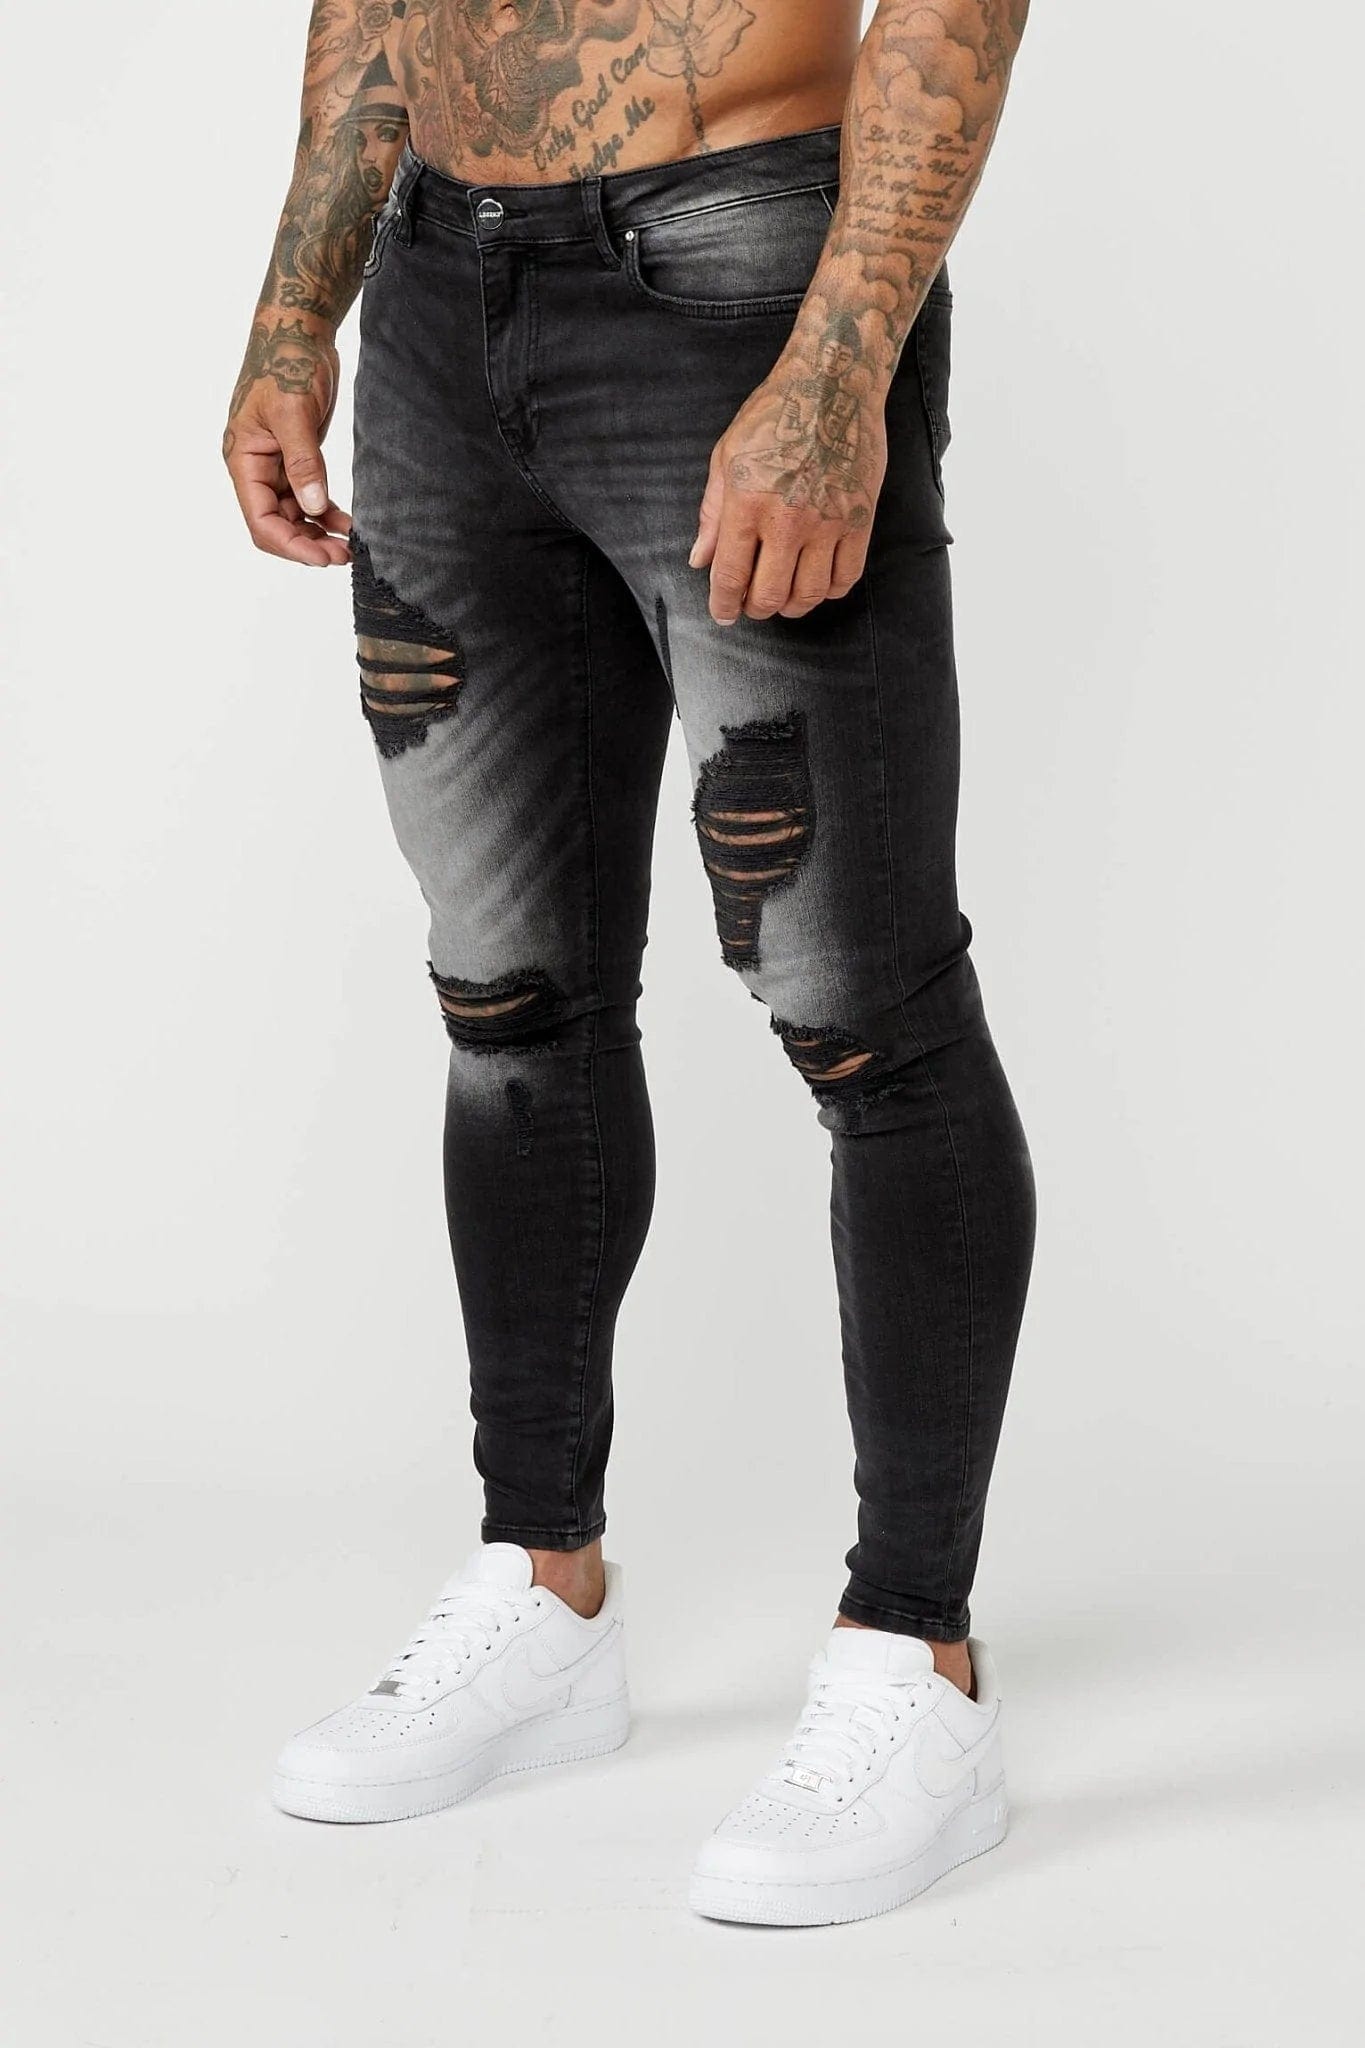 Gray, Men's Jeans, Ripped & Skinny Jeans